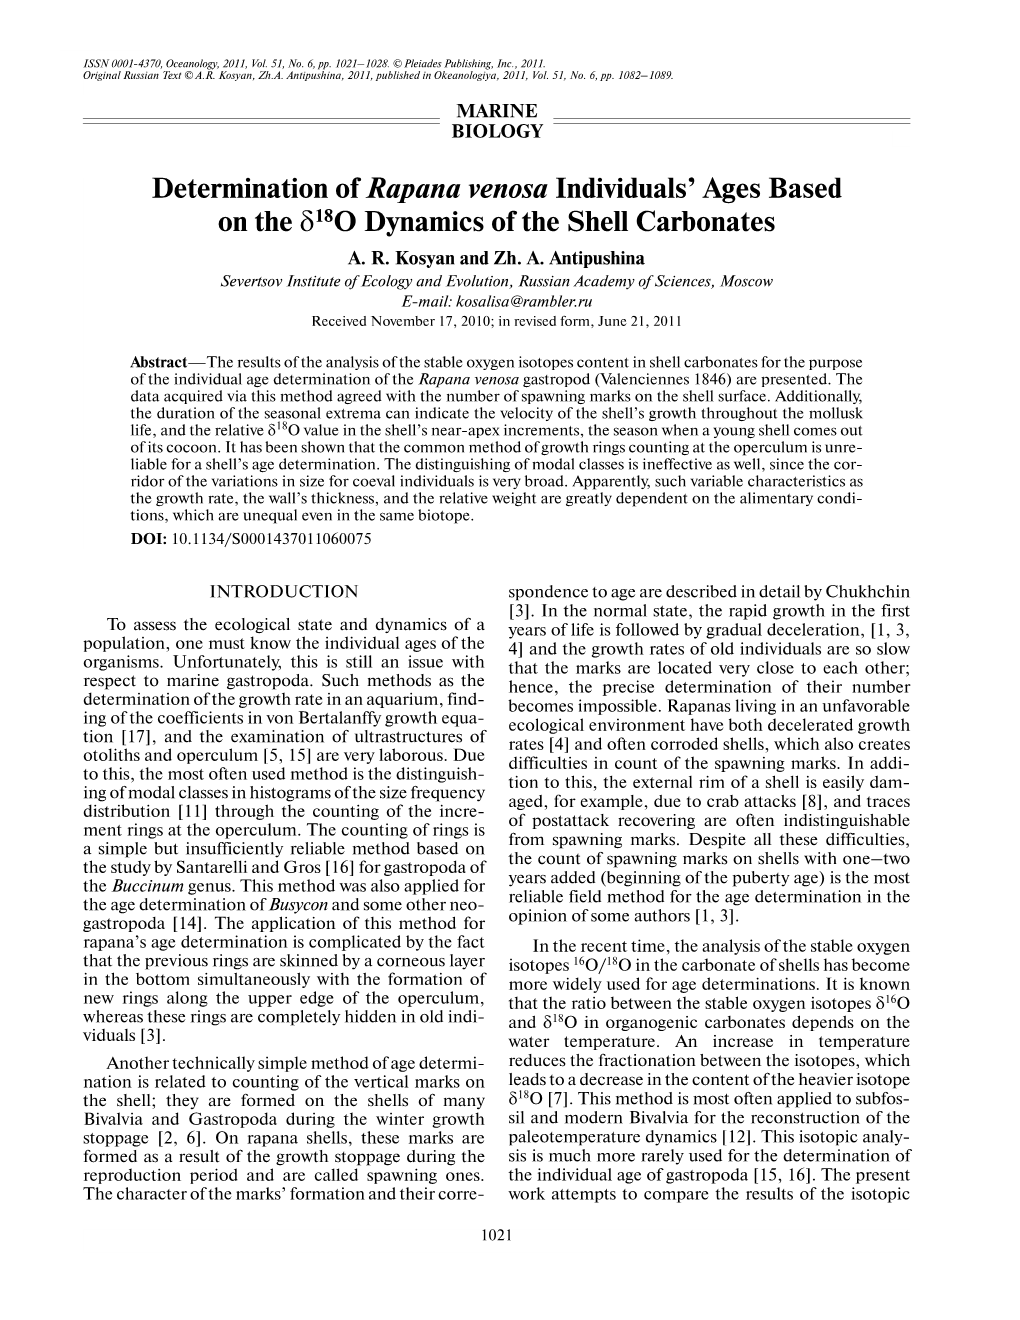 Determination of Rapana Venosa Individuals' Ages Based on The